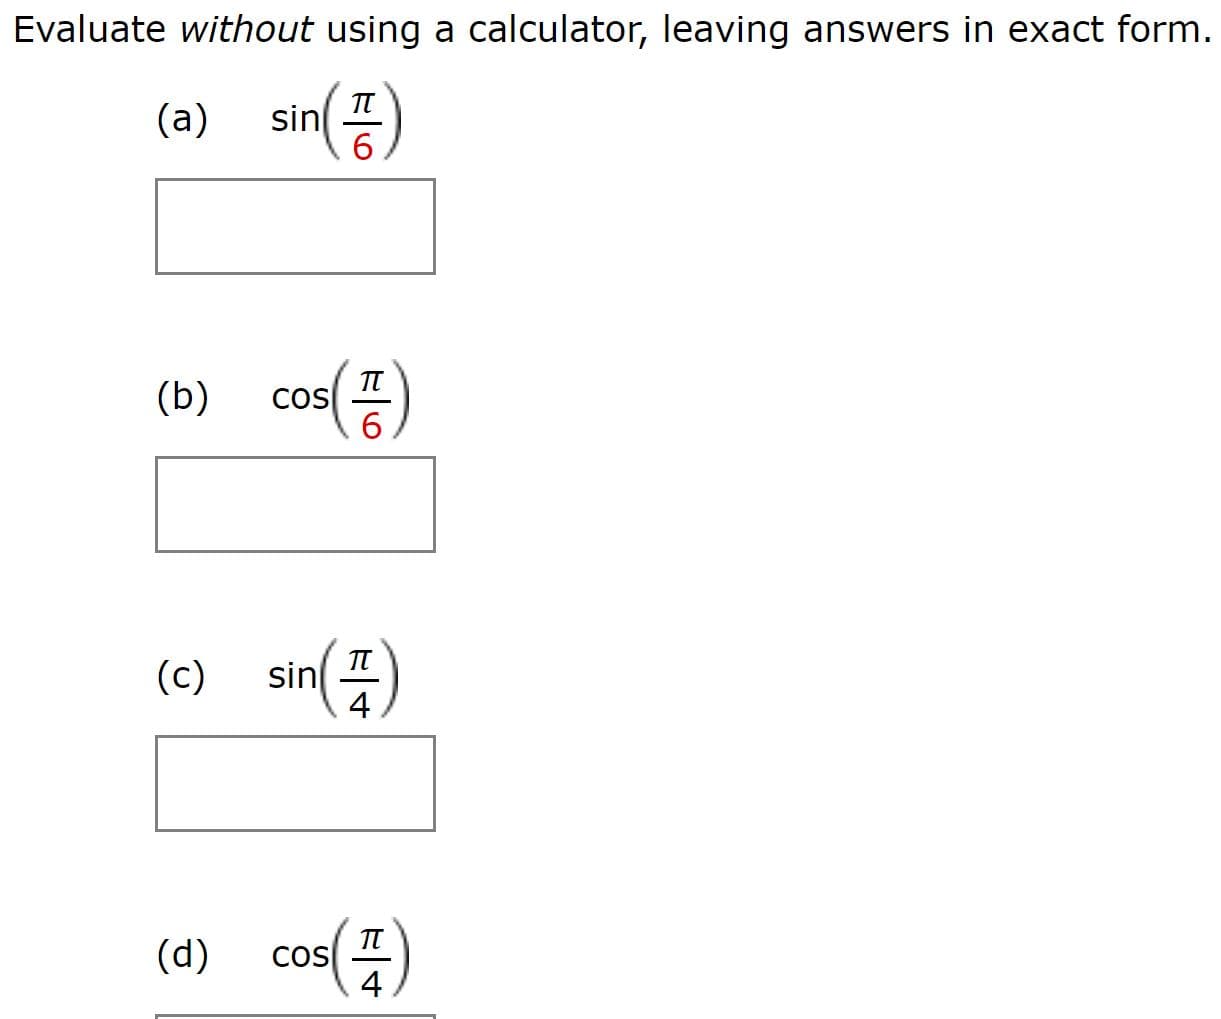 Evaluate without using a calculator, leaving answers in exact form.
sin
(a)
TT
CoS
(b)
sin(프)
TT
(c)
TT
CoS
4
(d)
